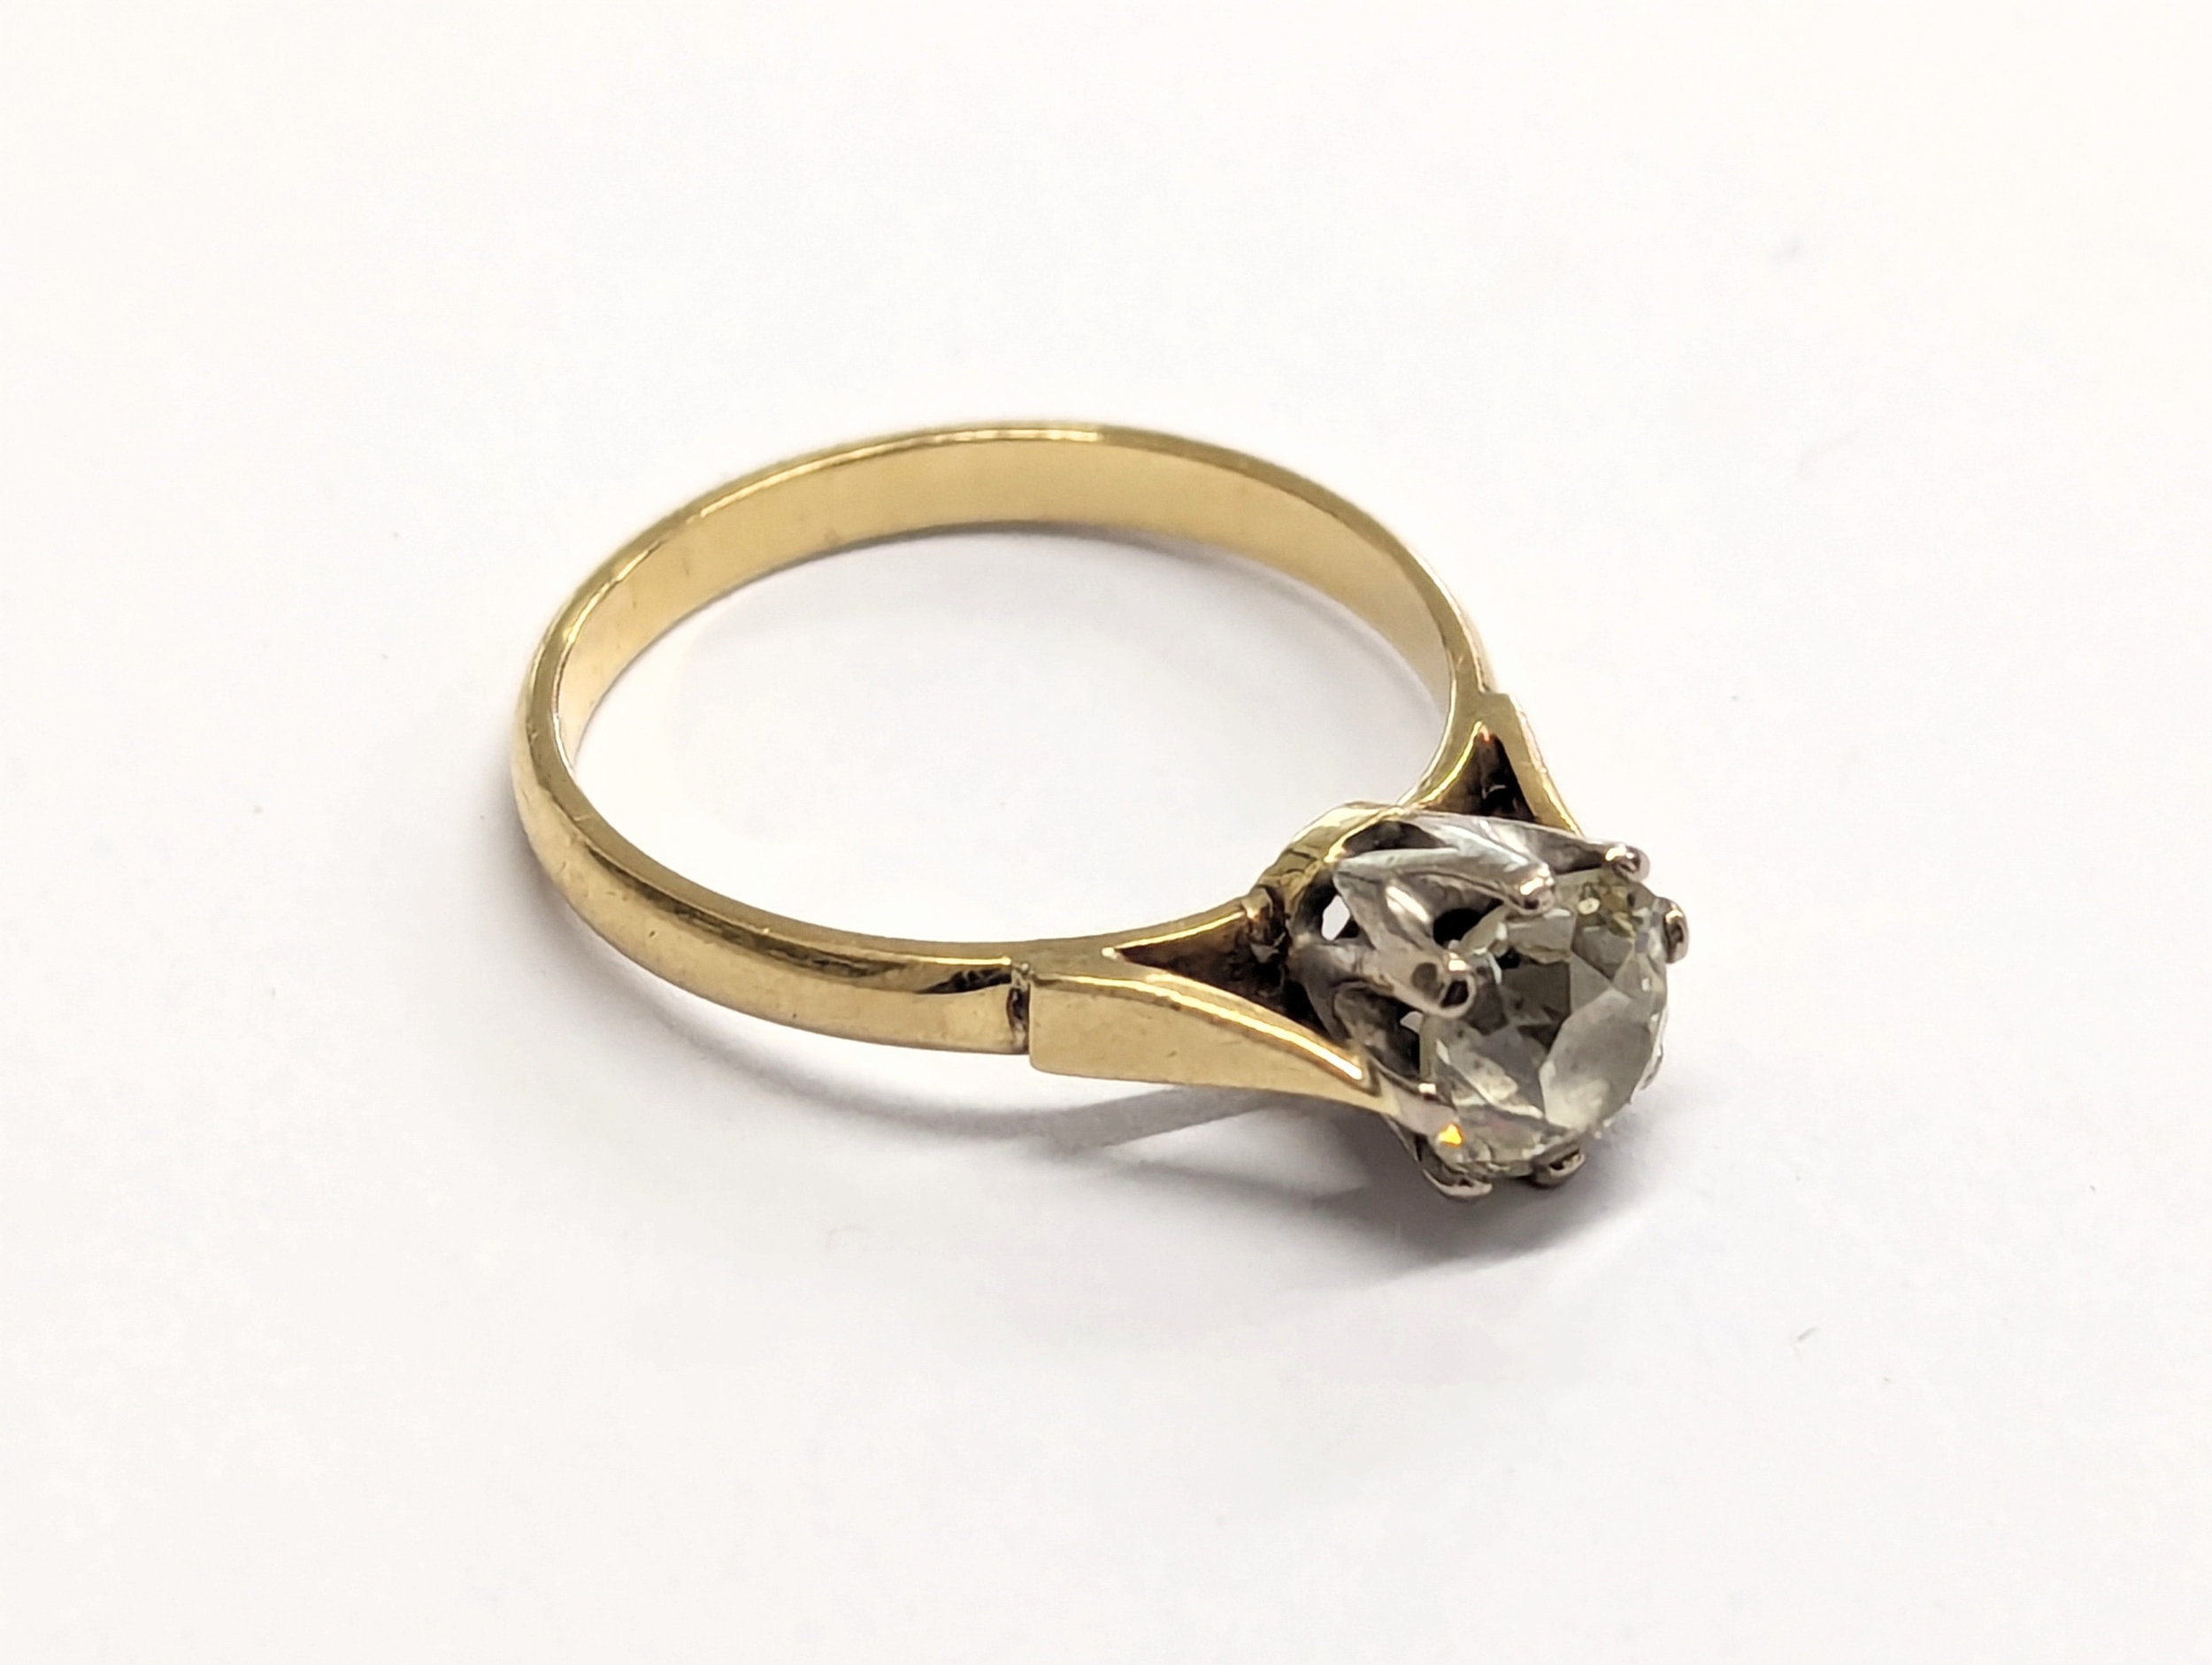 An 18ct gold, Victorian rose cut diamond solitaire ring. Diamond is 1.20ct. UK size P. - Image 3 of 4